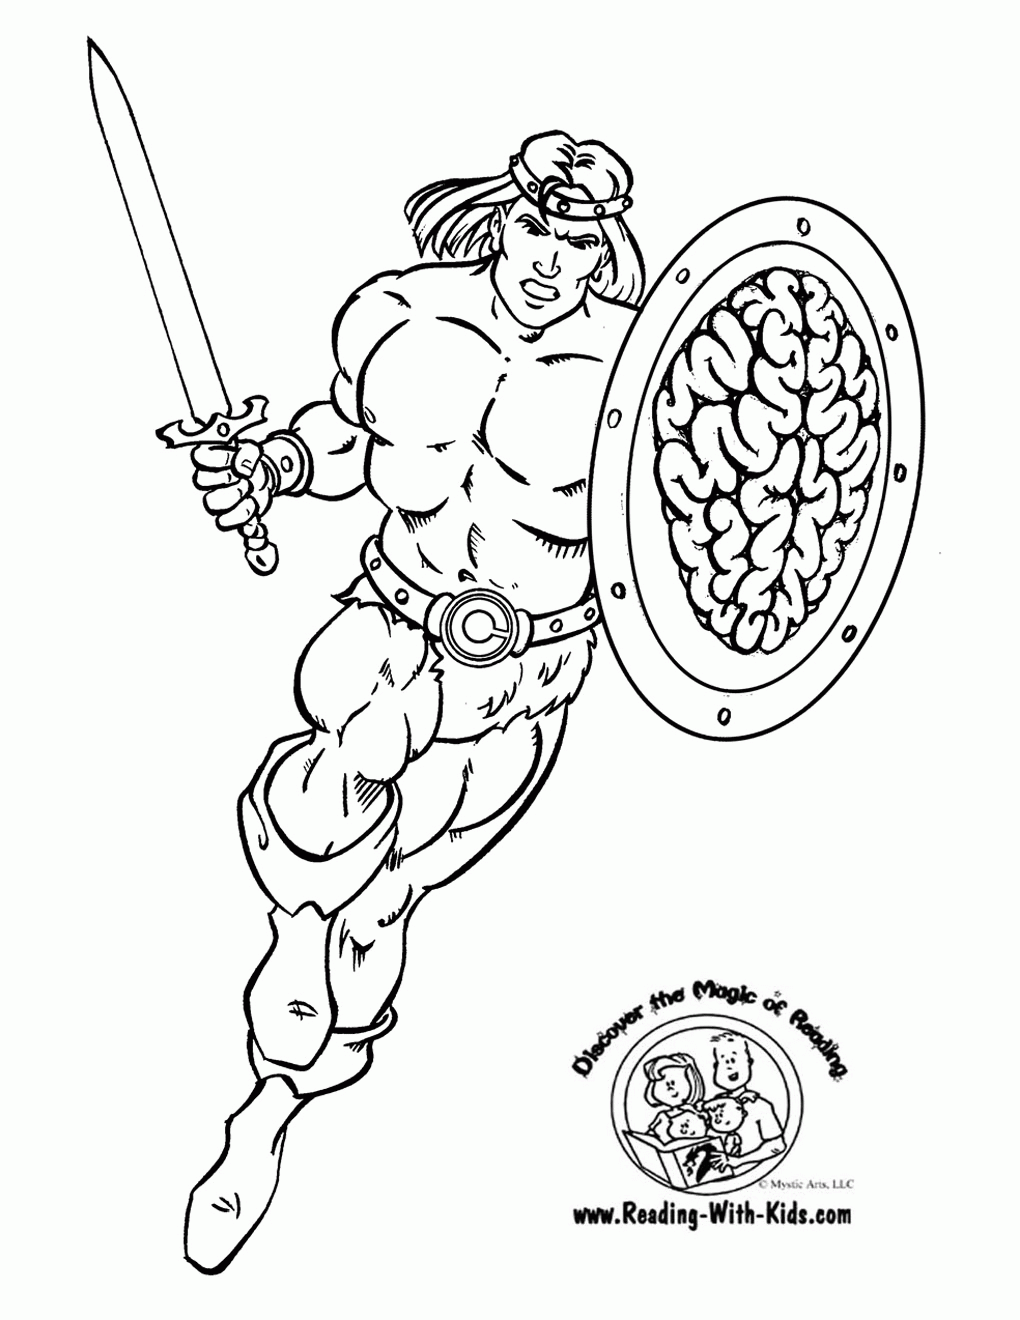 Advanced Warrior Coloring Pages - Coloring Pages For All Ages